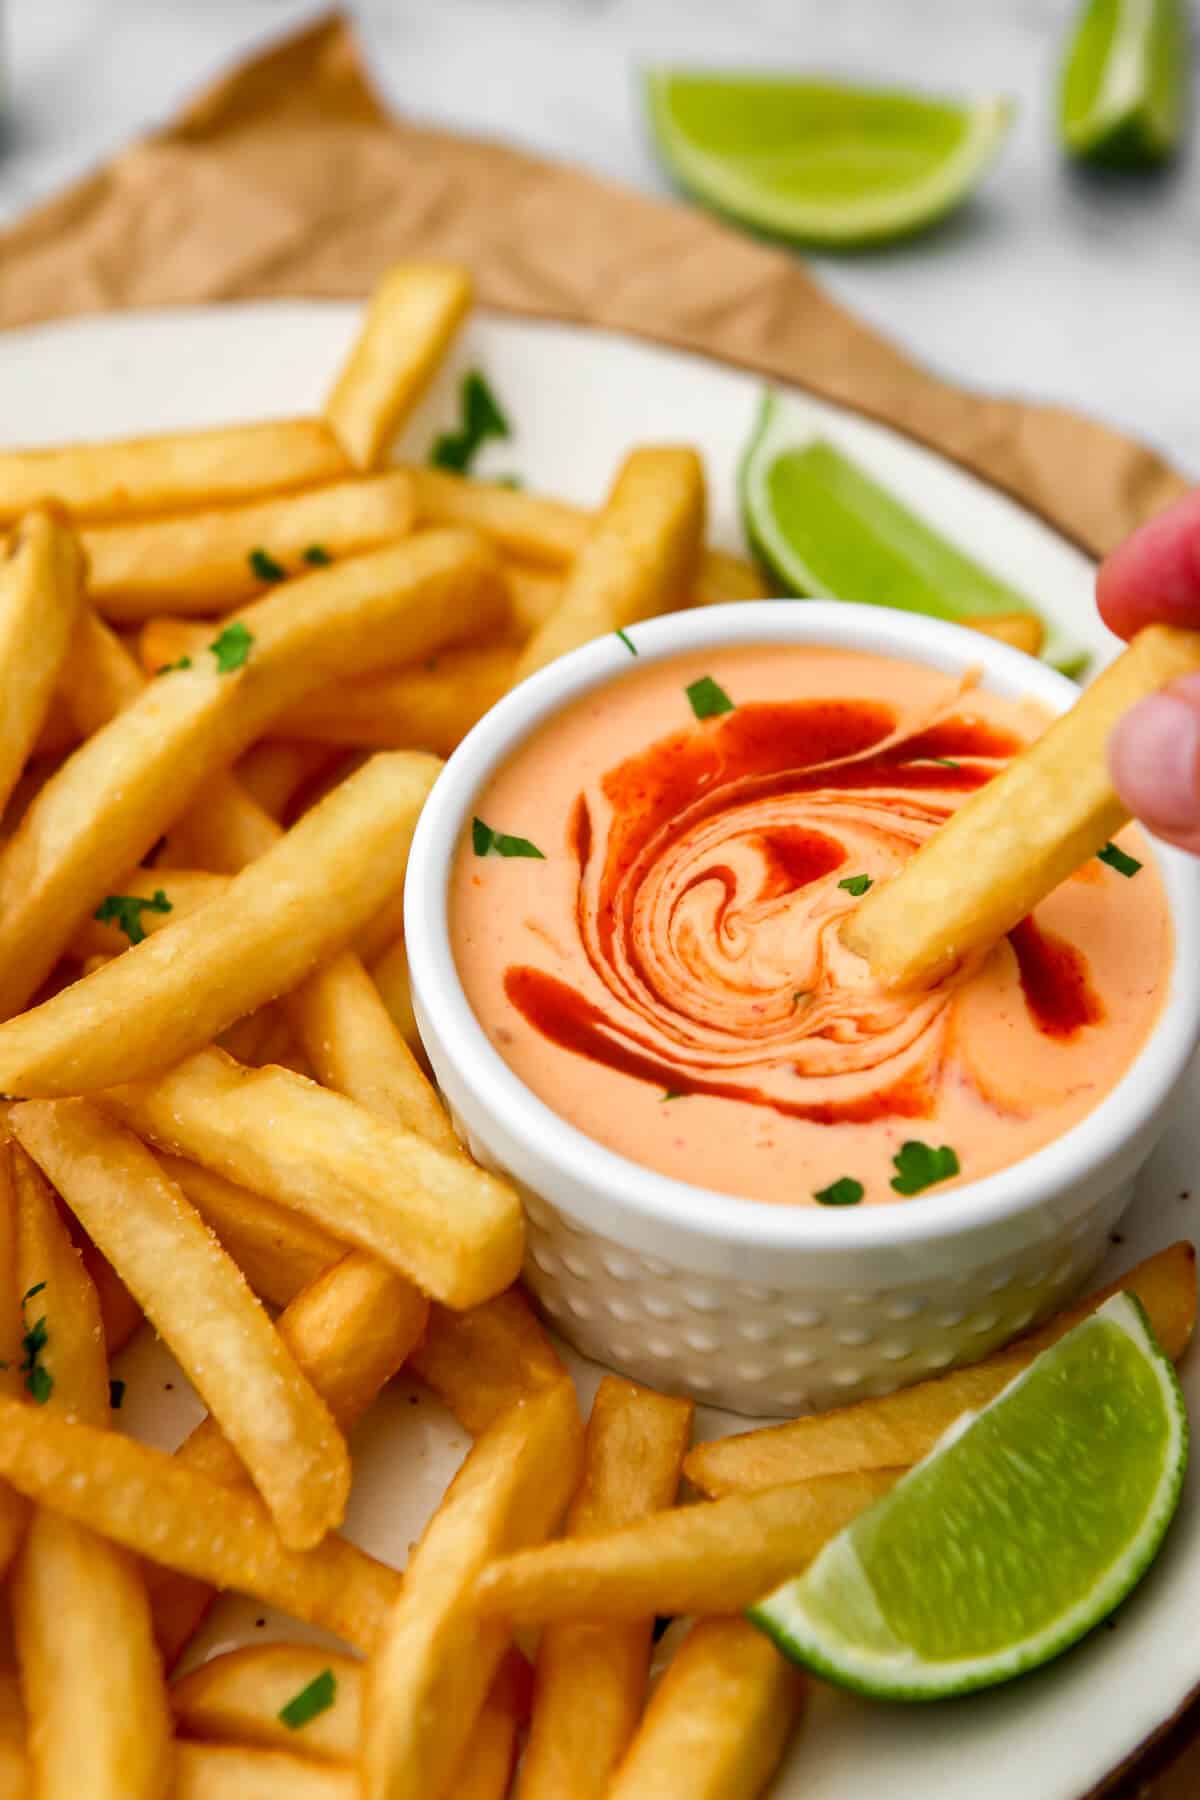 French fries on a white plate being dipped into a small white bowl of vegan sriracha mayo with slices of limes around it.